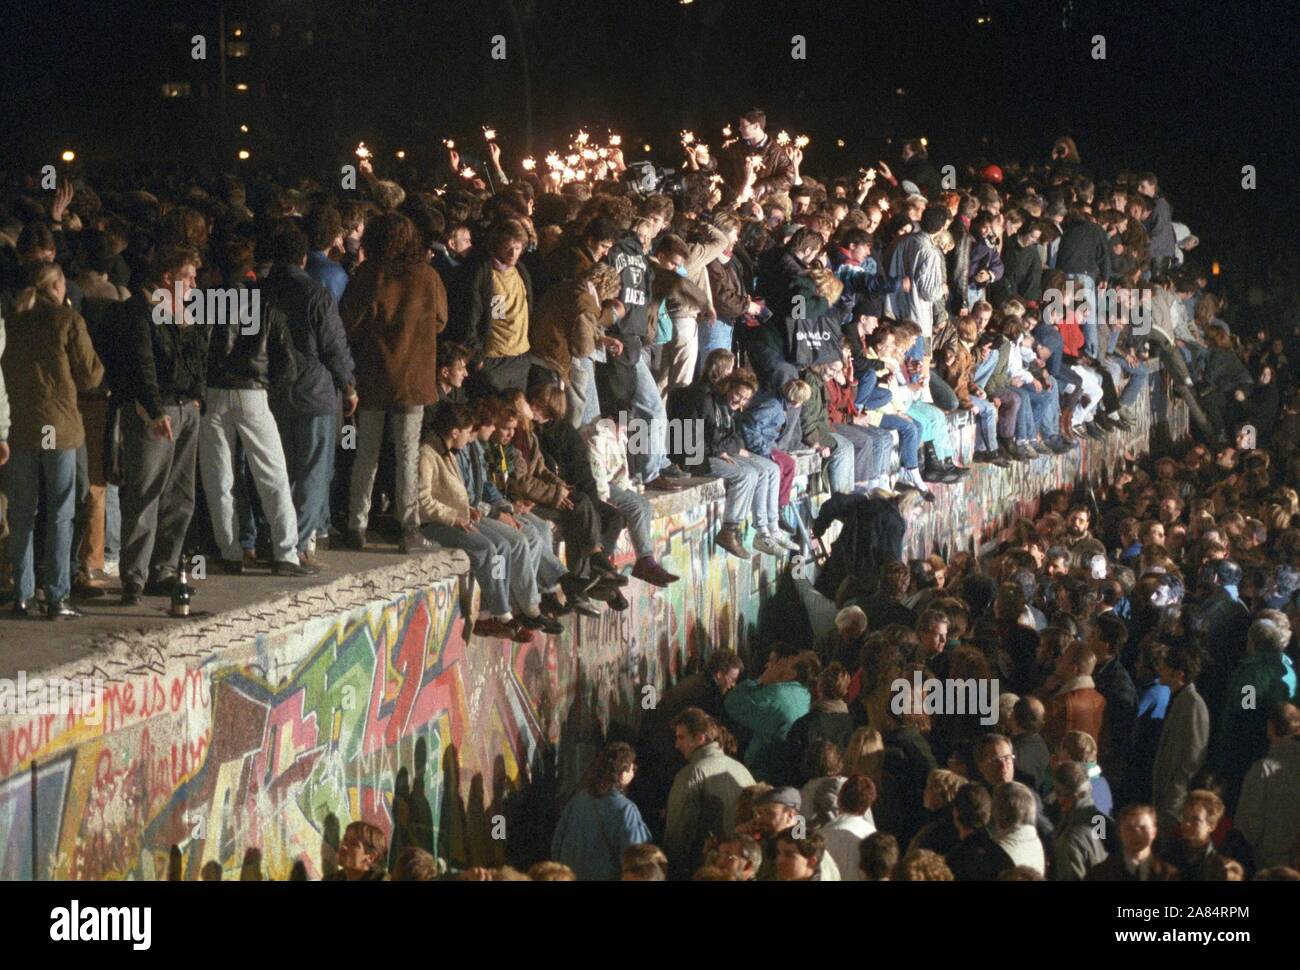 Berliners and people from all over Germany celebrate with sparklers on the Berlin Wall on November 11th 1989. After the GDR leadership had opened some border crossing points, millions of east Germans traveled to the west for short trips. (dpa / IPA / Fotogramma, Berlin - 2014-10-17) ps the photo is usable in respect of the context in which it was taken, and without defamatory intent of the decorum of the people represented Editorial Usage Only Stock Photo